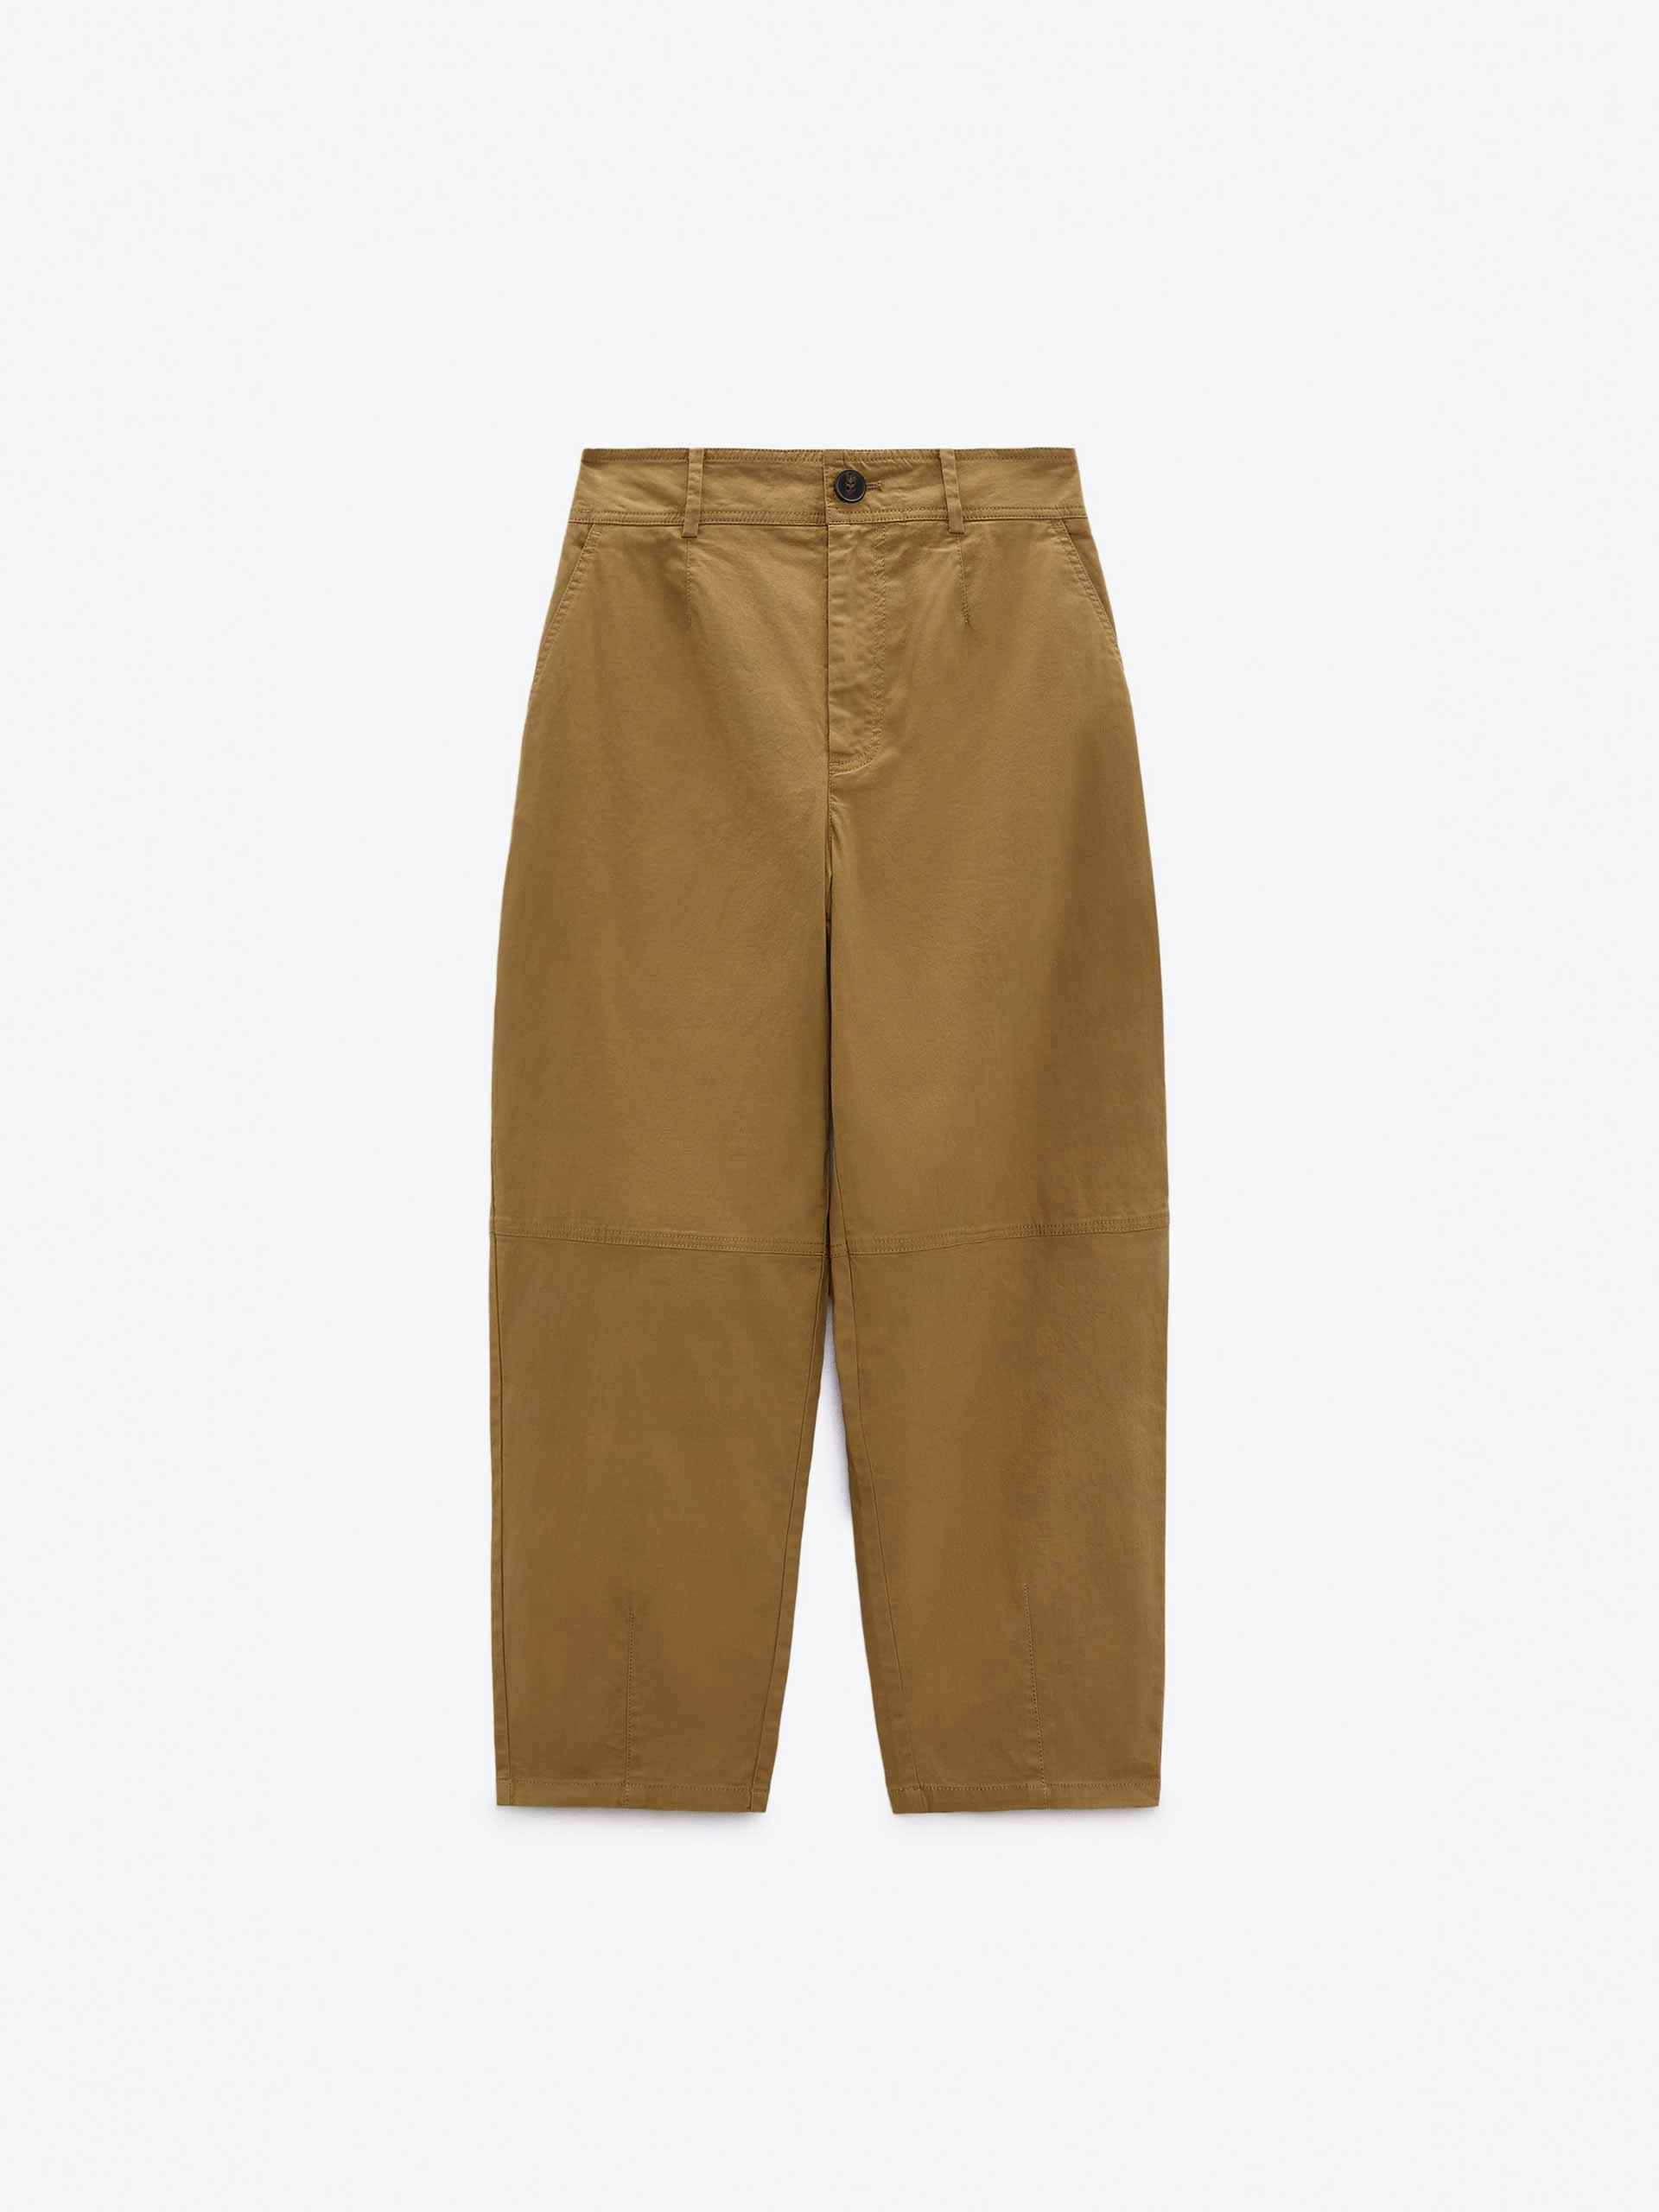 Brown high-waisted slouchy trousers